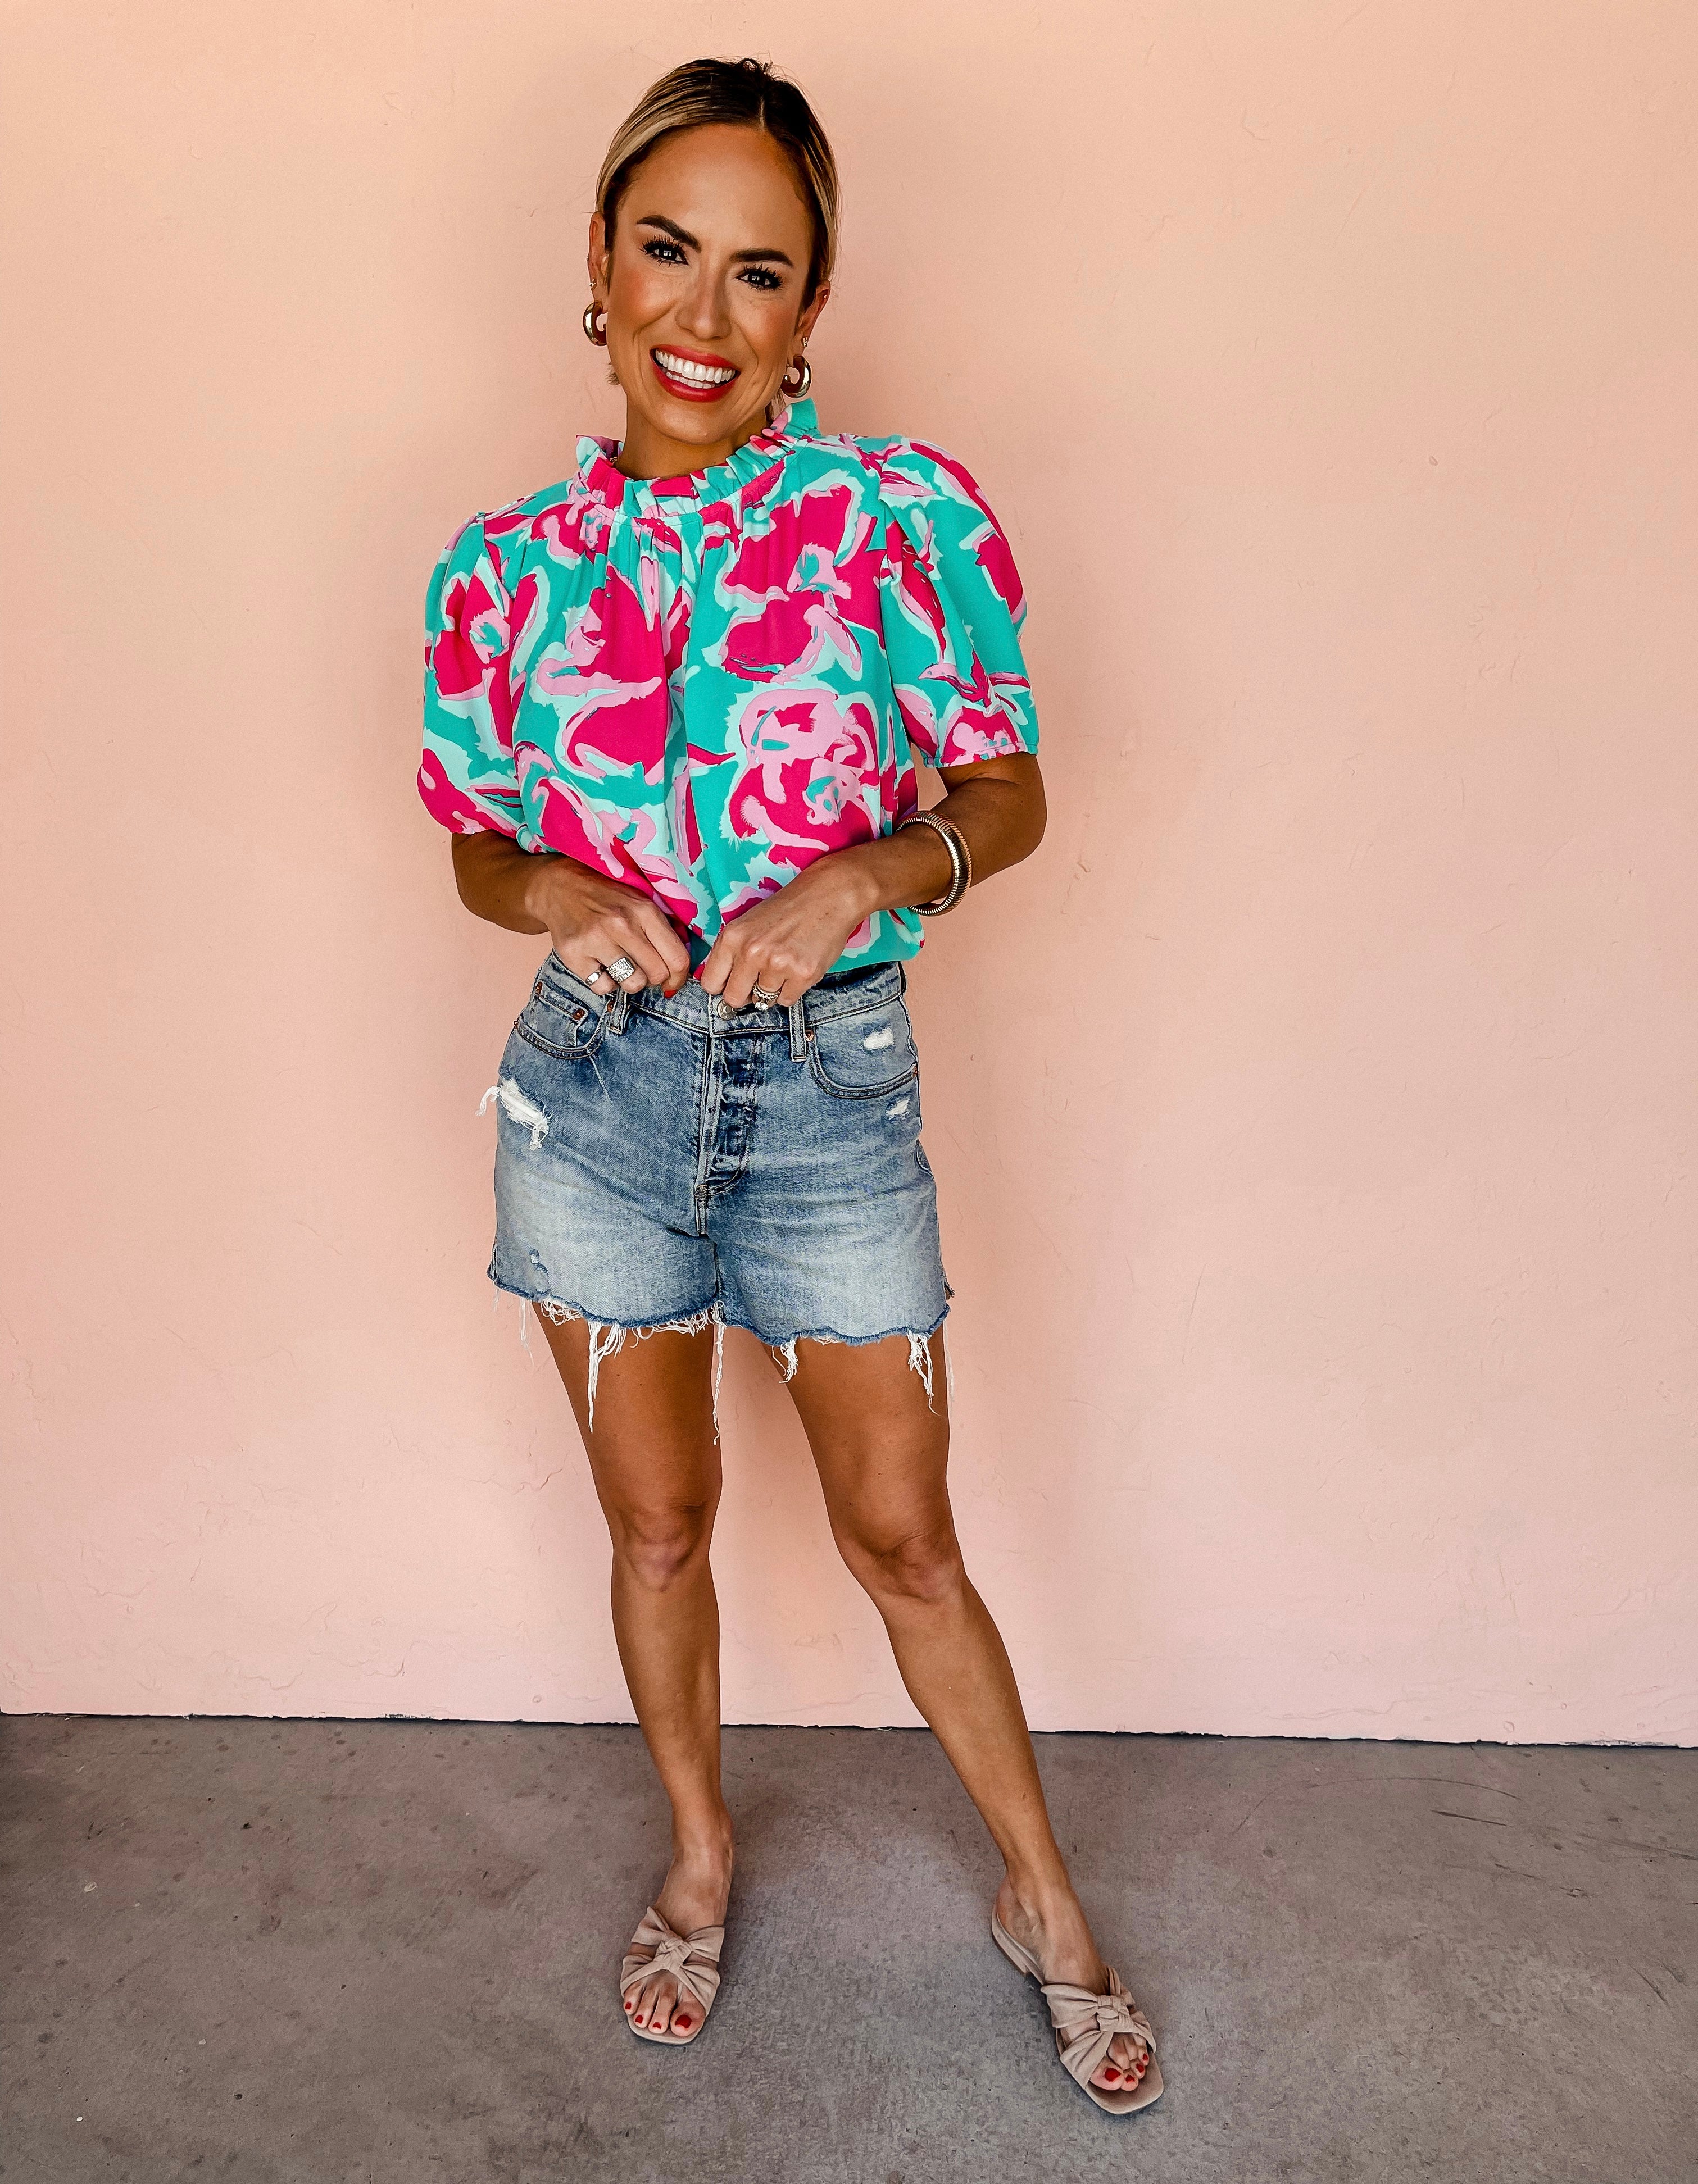 Everyday Dreams Floral Top-Turquoise